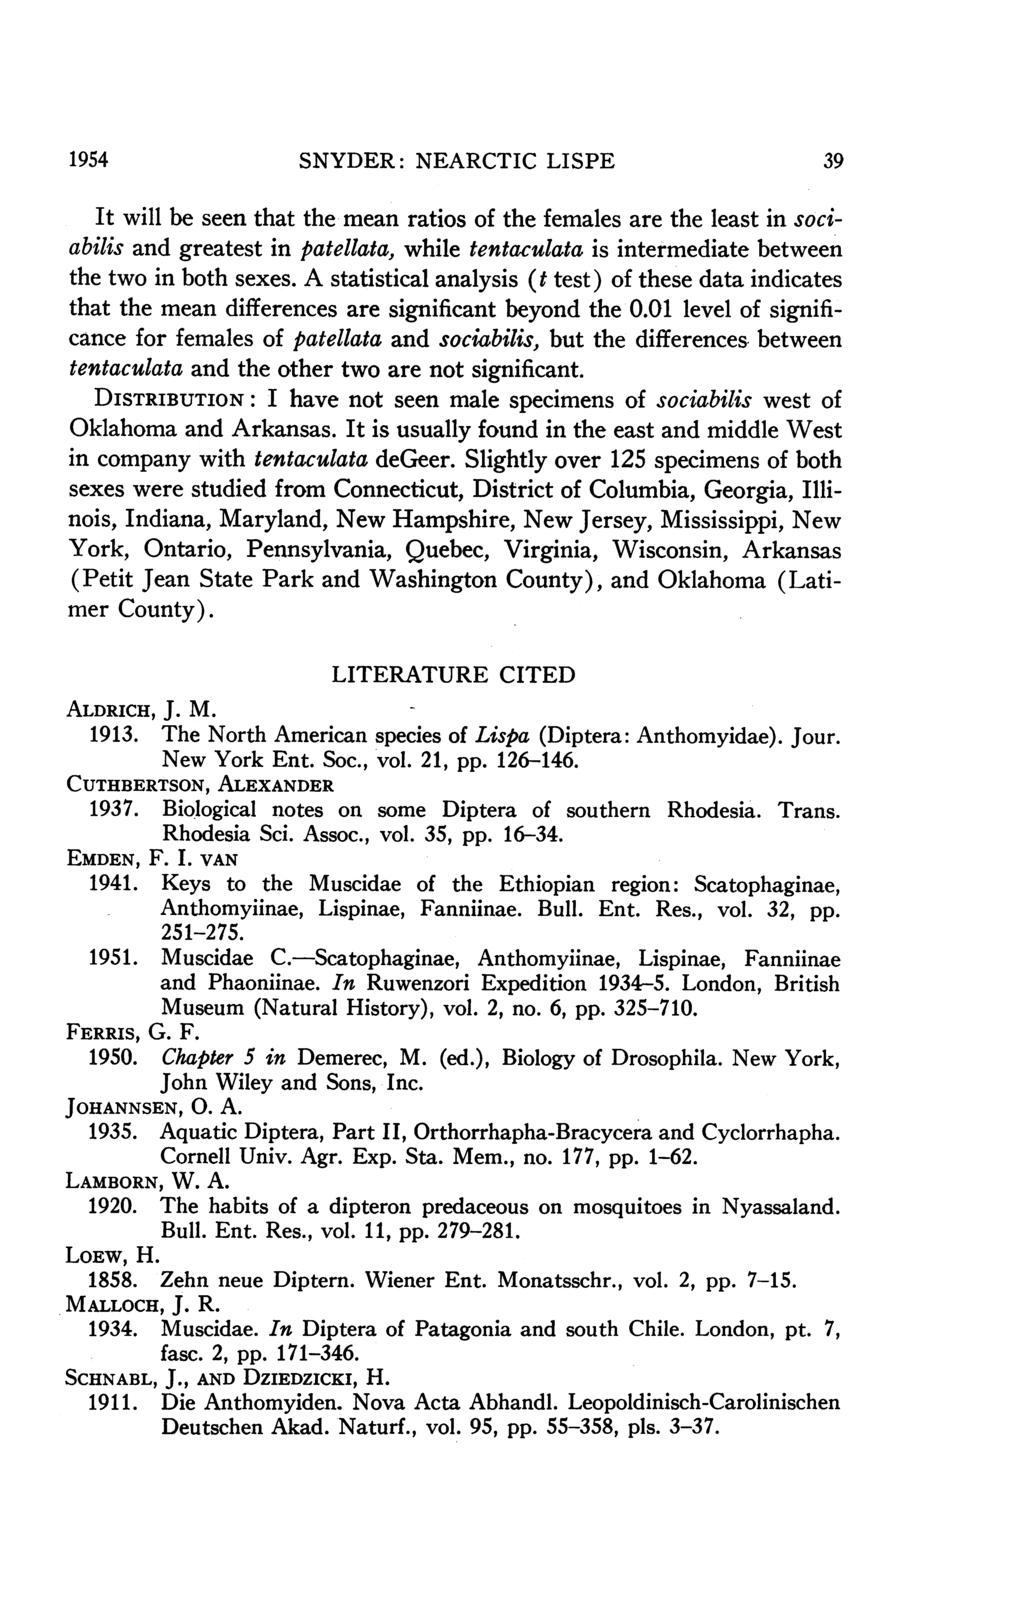 1954 SNYDER: NEARCTIC LISPE 39 It will be seen that the mean ratios of the females are the least in sociabilis and greatest in patellata, while tentaculata is intermediate between the two in both